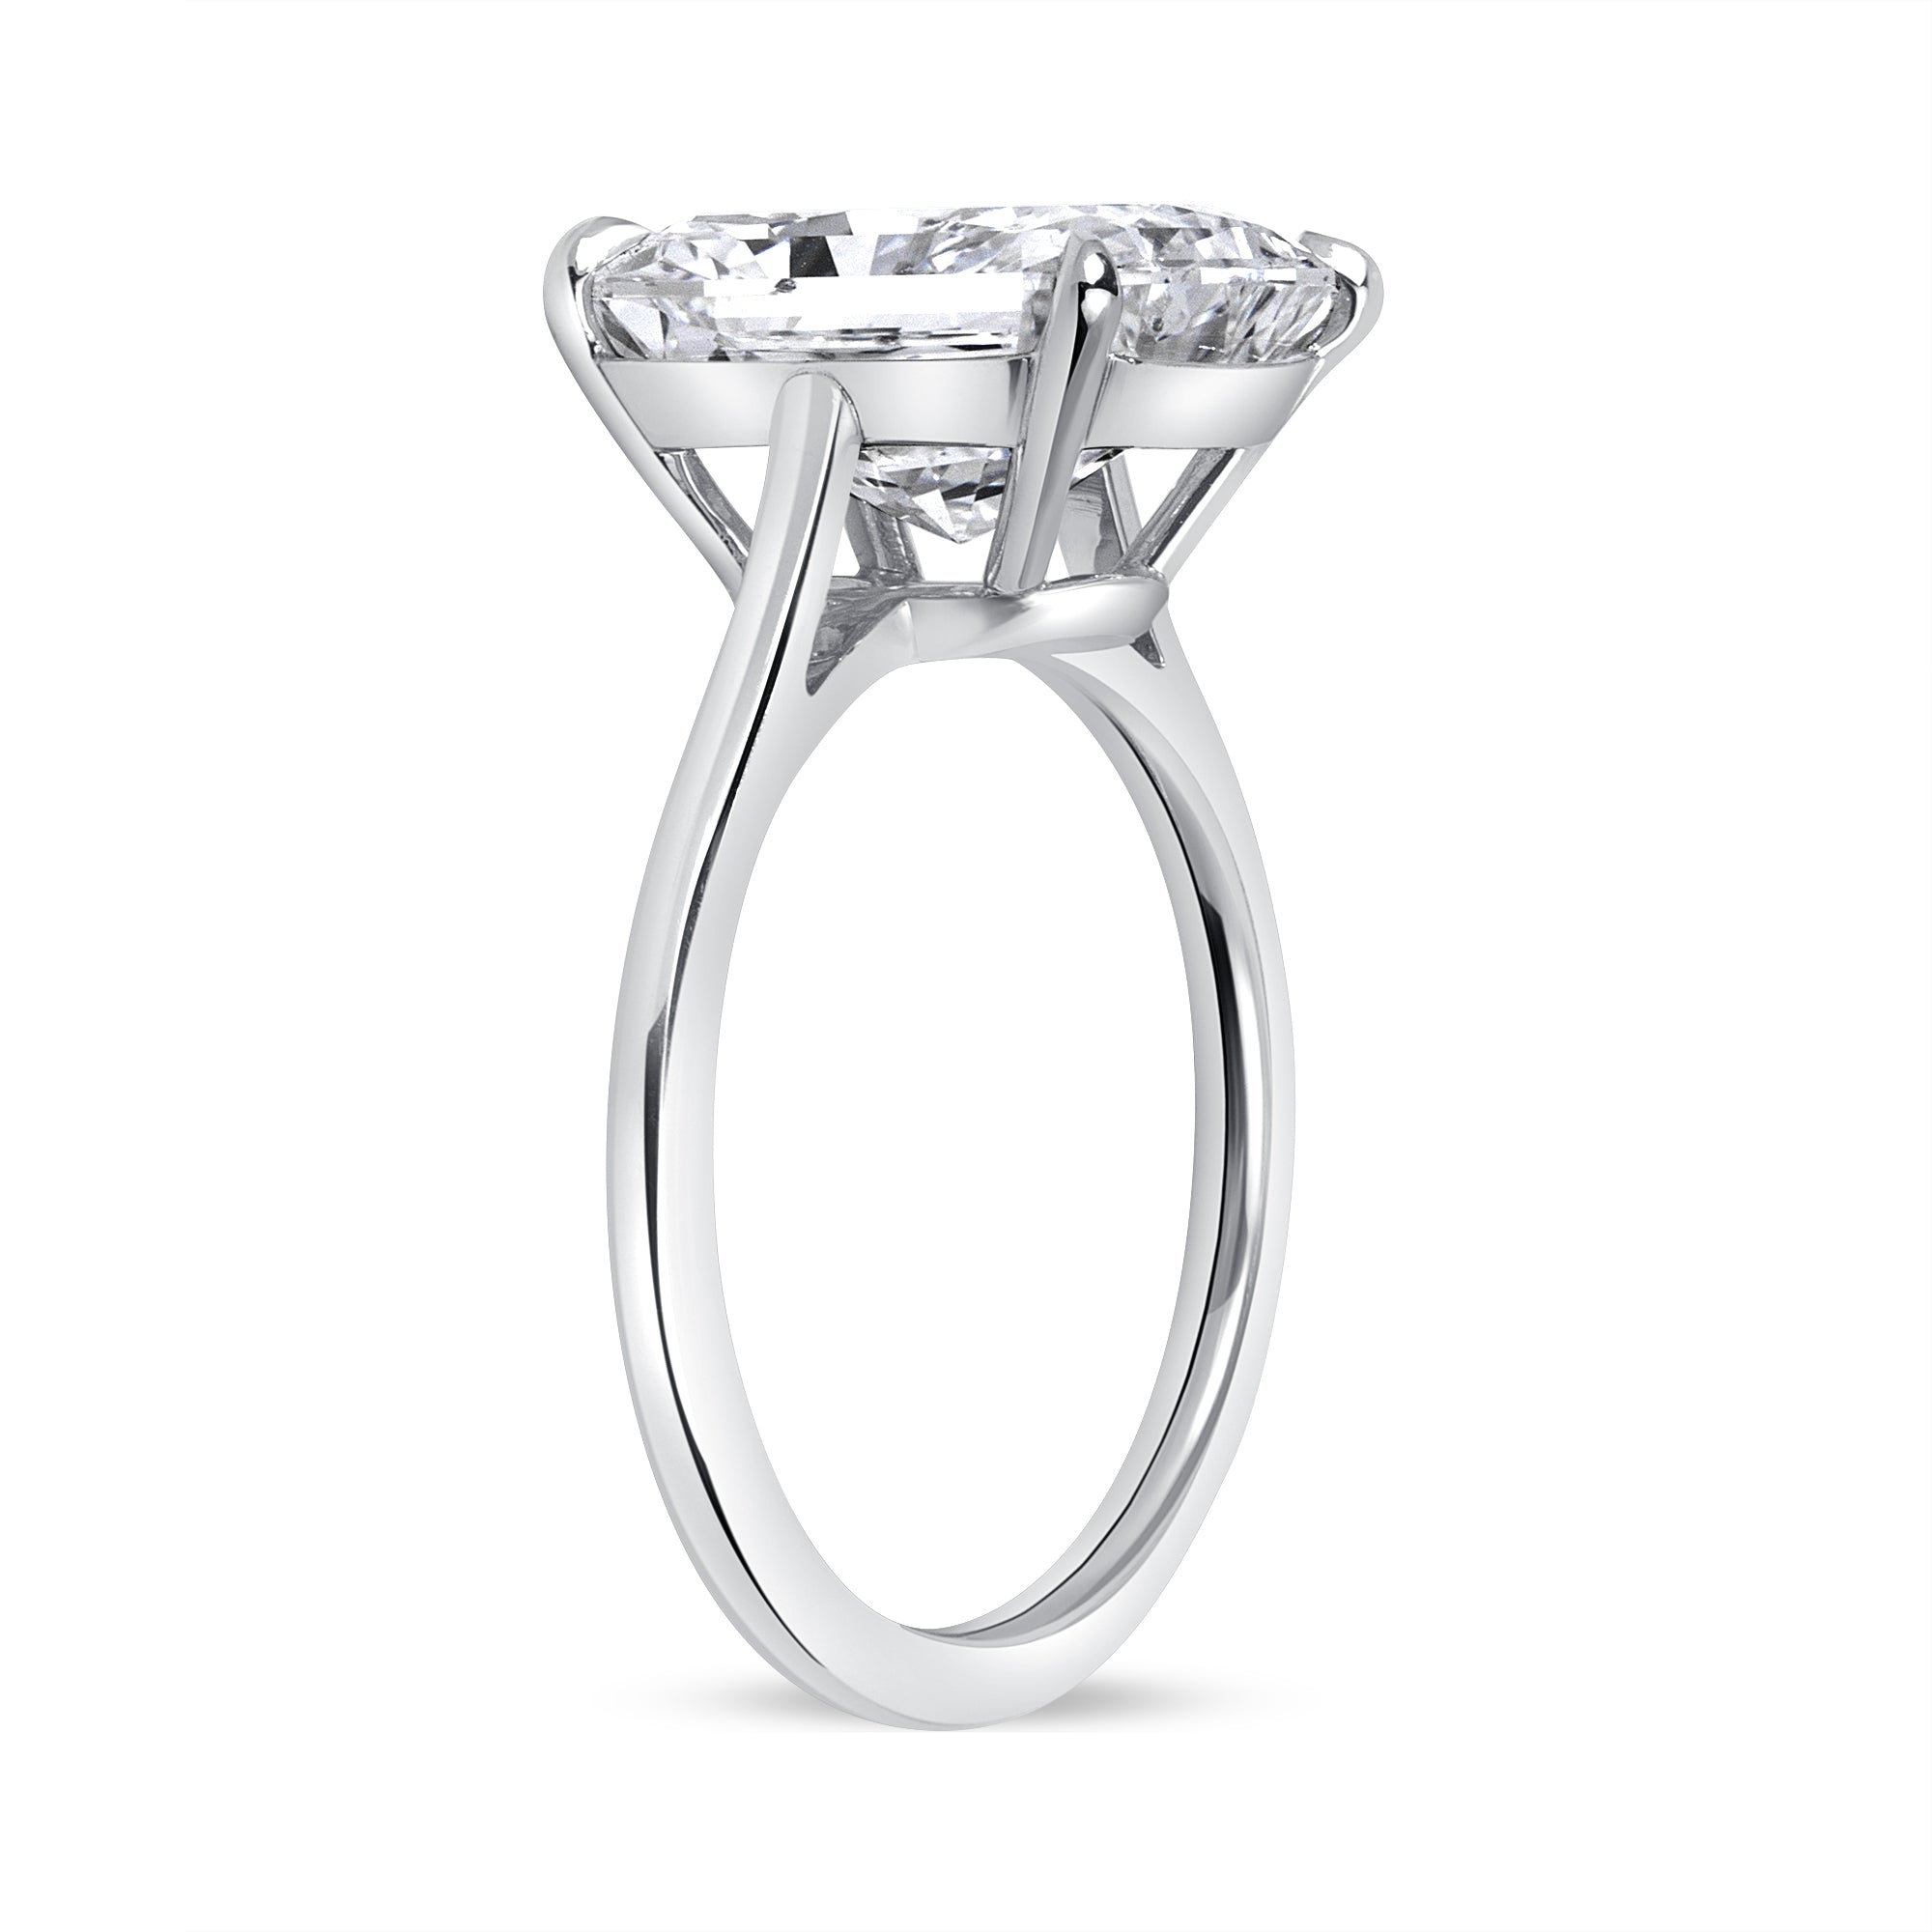 5.01ct Radiant Cut Diamond Solitaire Ring in Platinum Band, GIA Certified